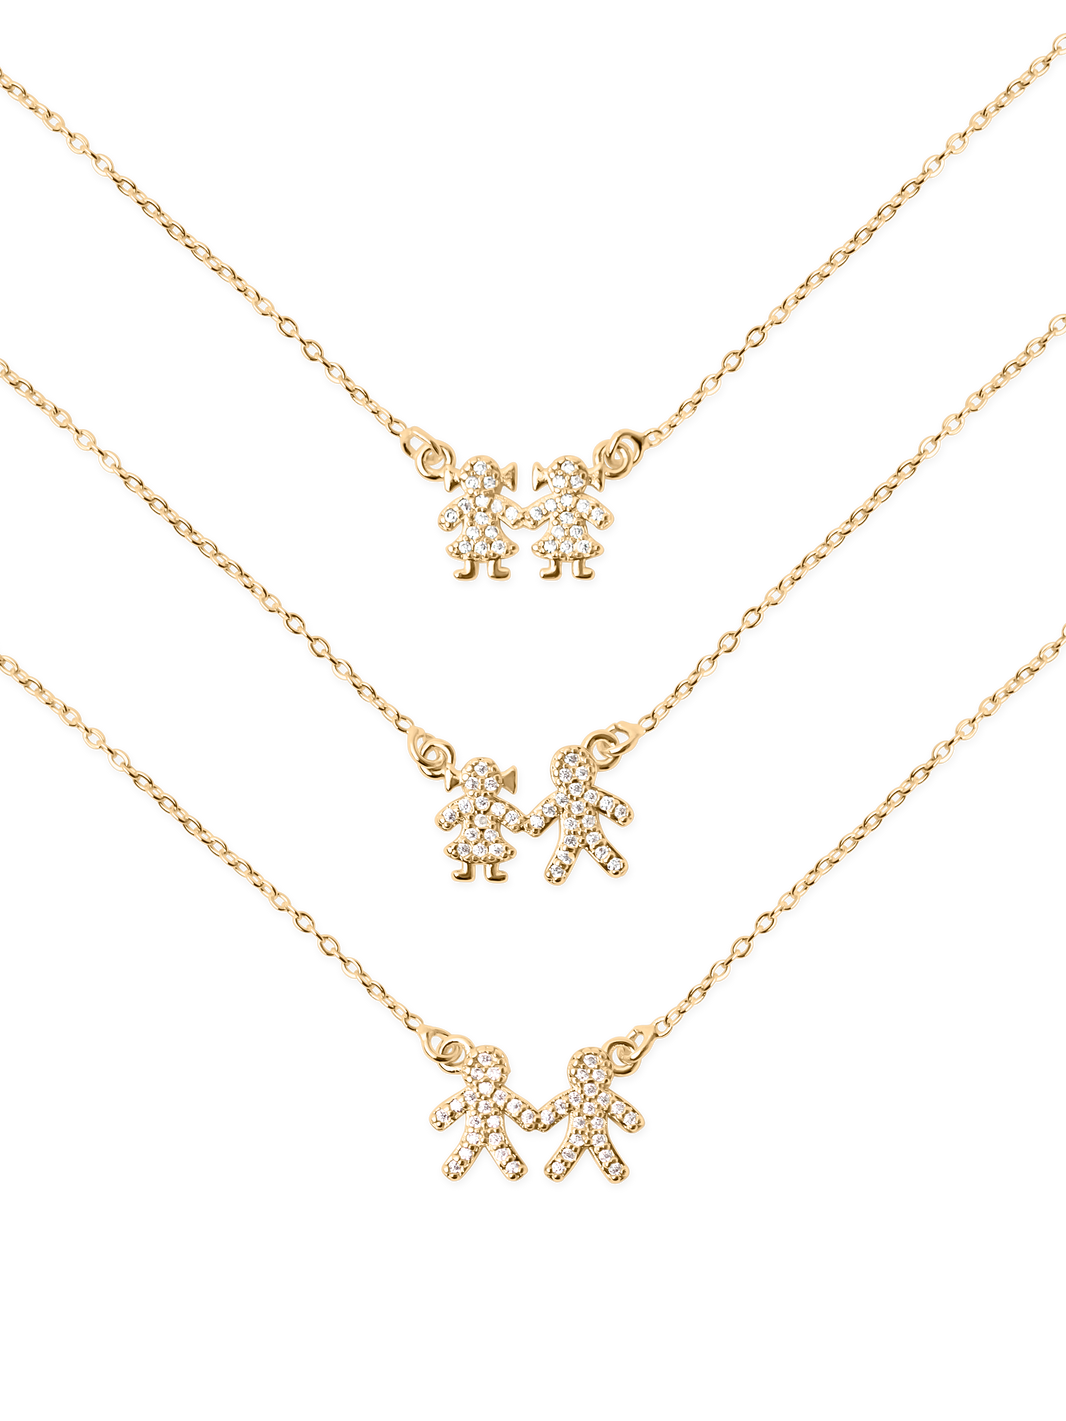 Sibling Necklace by Janni Delér 18k gold plated brass